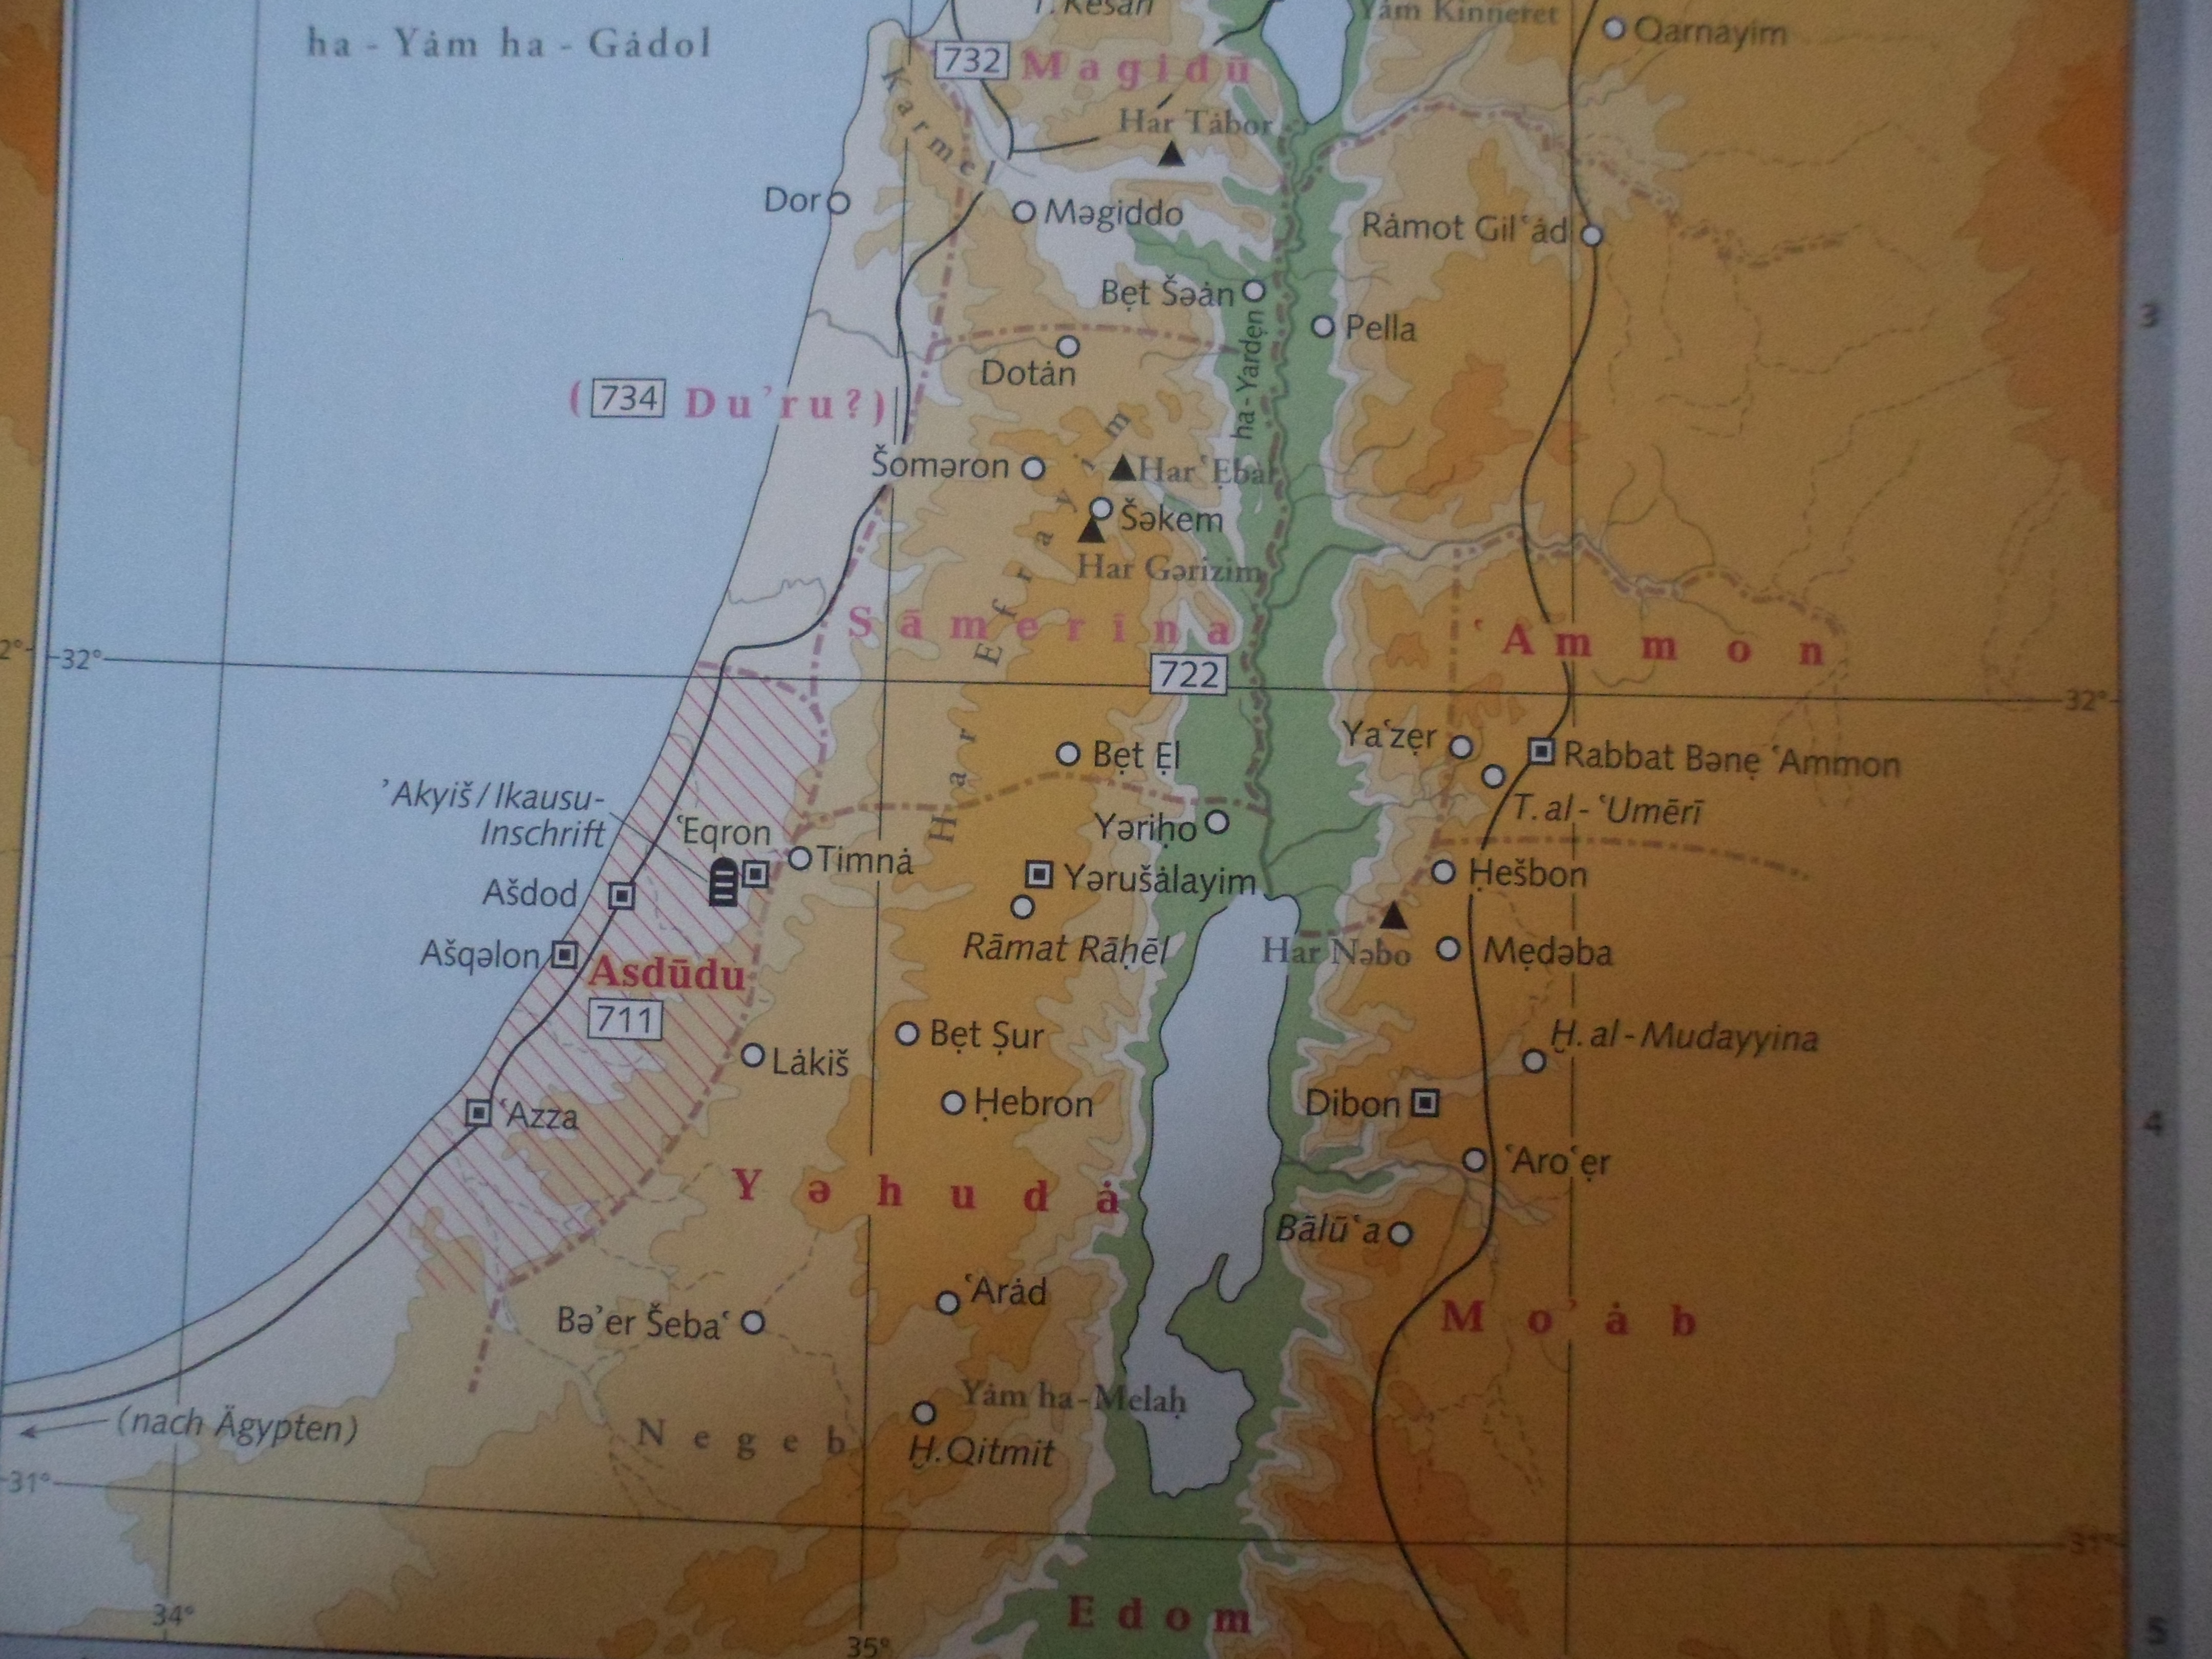 A map of the southern Levant in antiquity with Eqron about 20 km inland from and a bit north of Ashkelon and 30 km west of Jerusalem